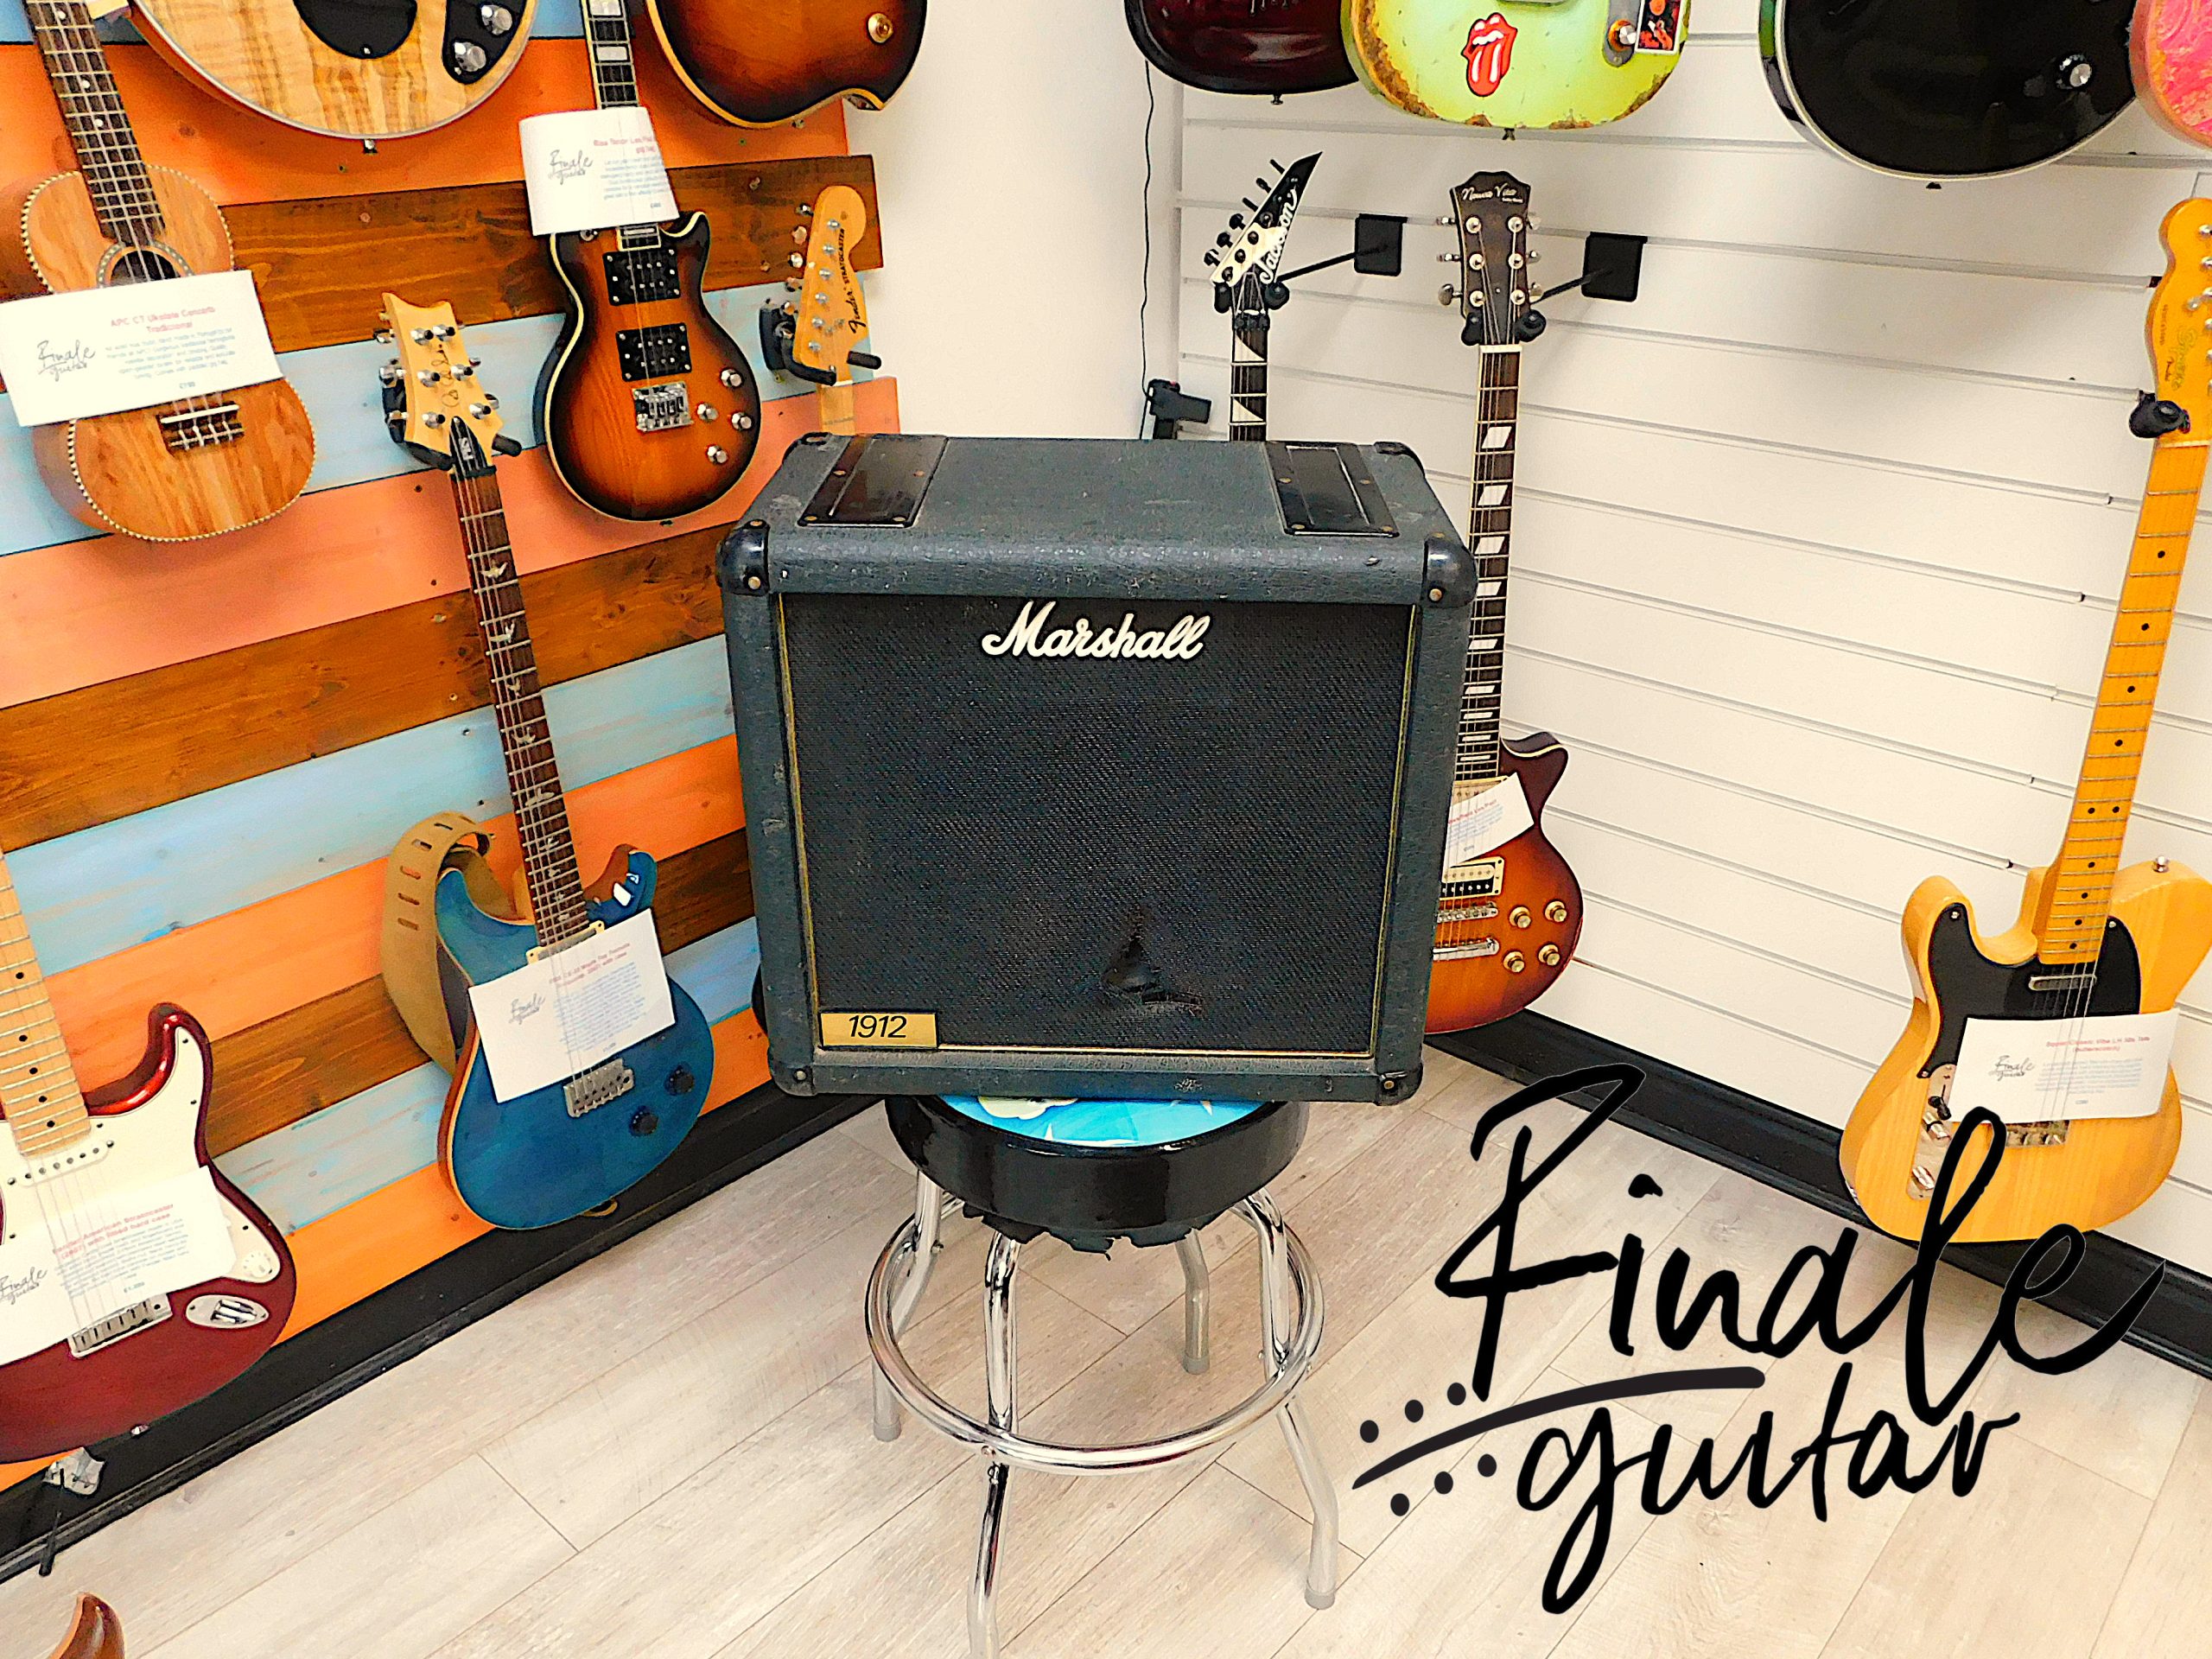 Marshall 1912 cabinet with Celestion Greenback speaker for sale in our Sheffield guitar shop, Finale Guitar